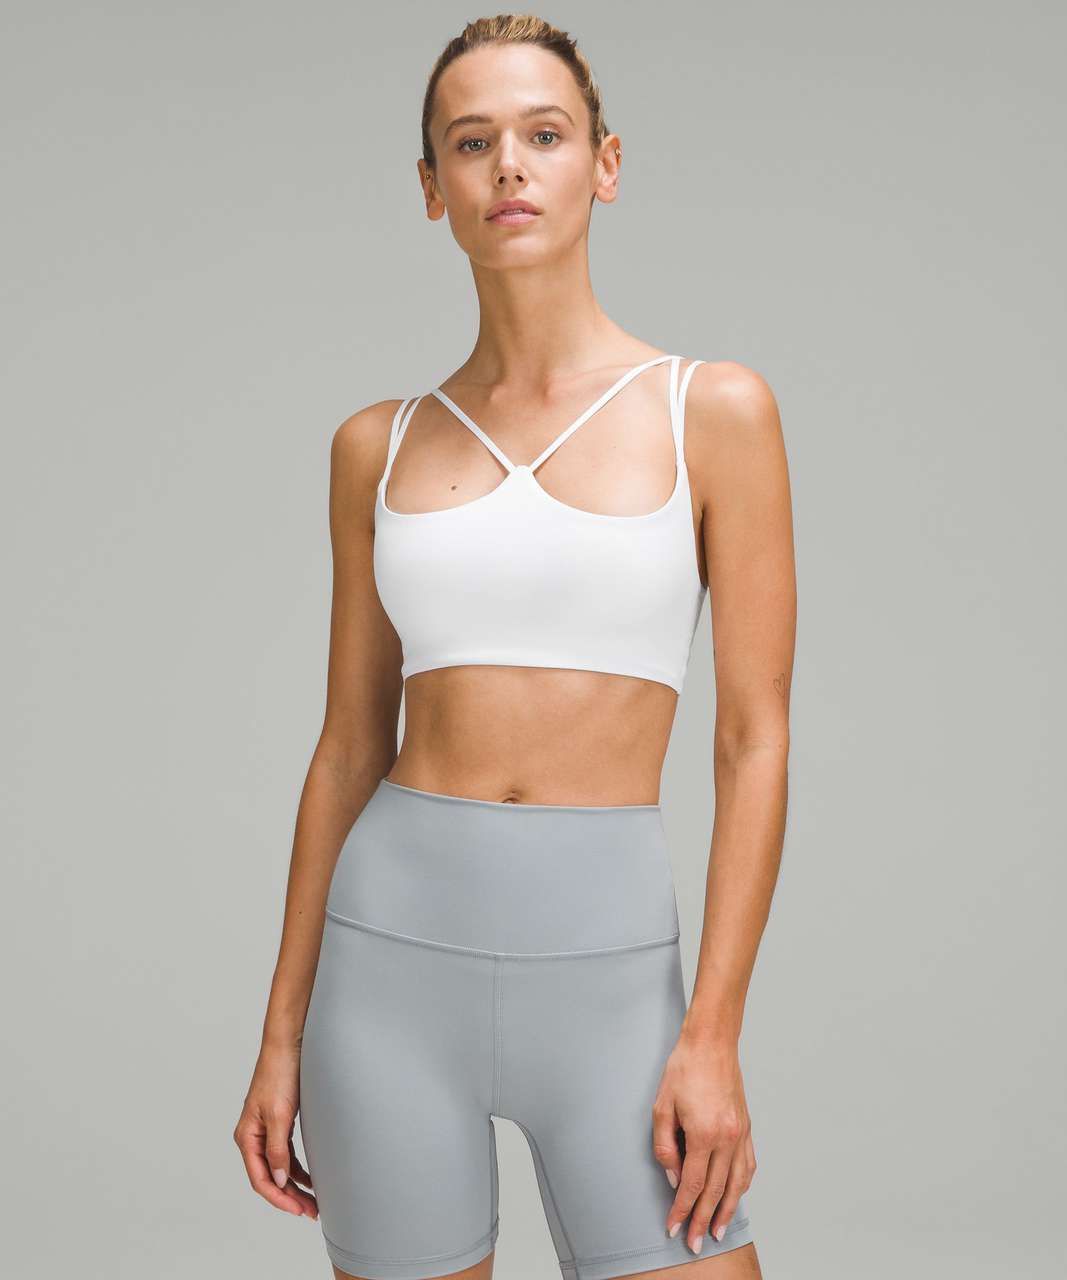 Has anyone tried the nulu strappy yoga bra before? How's the fit and